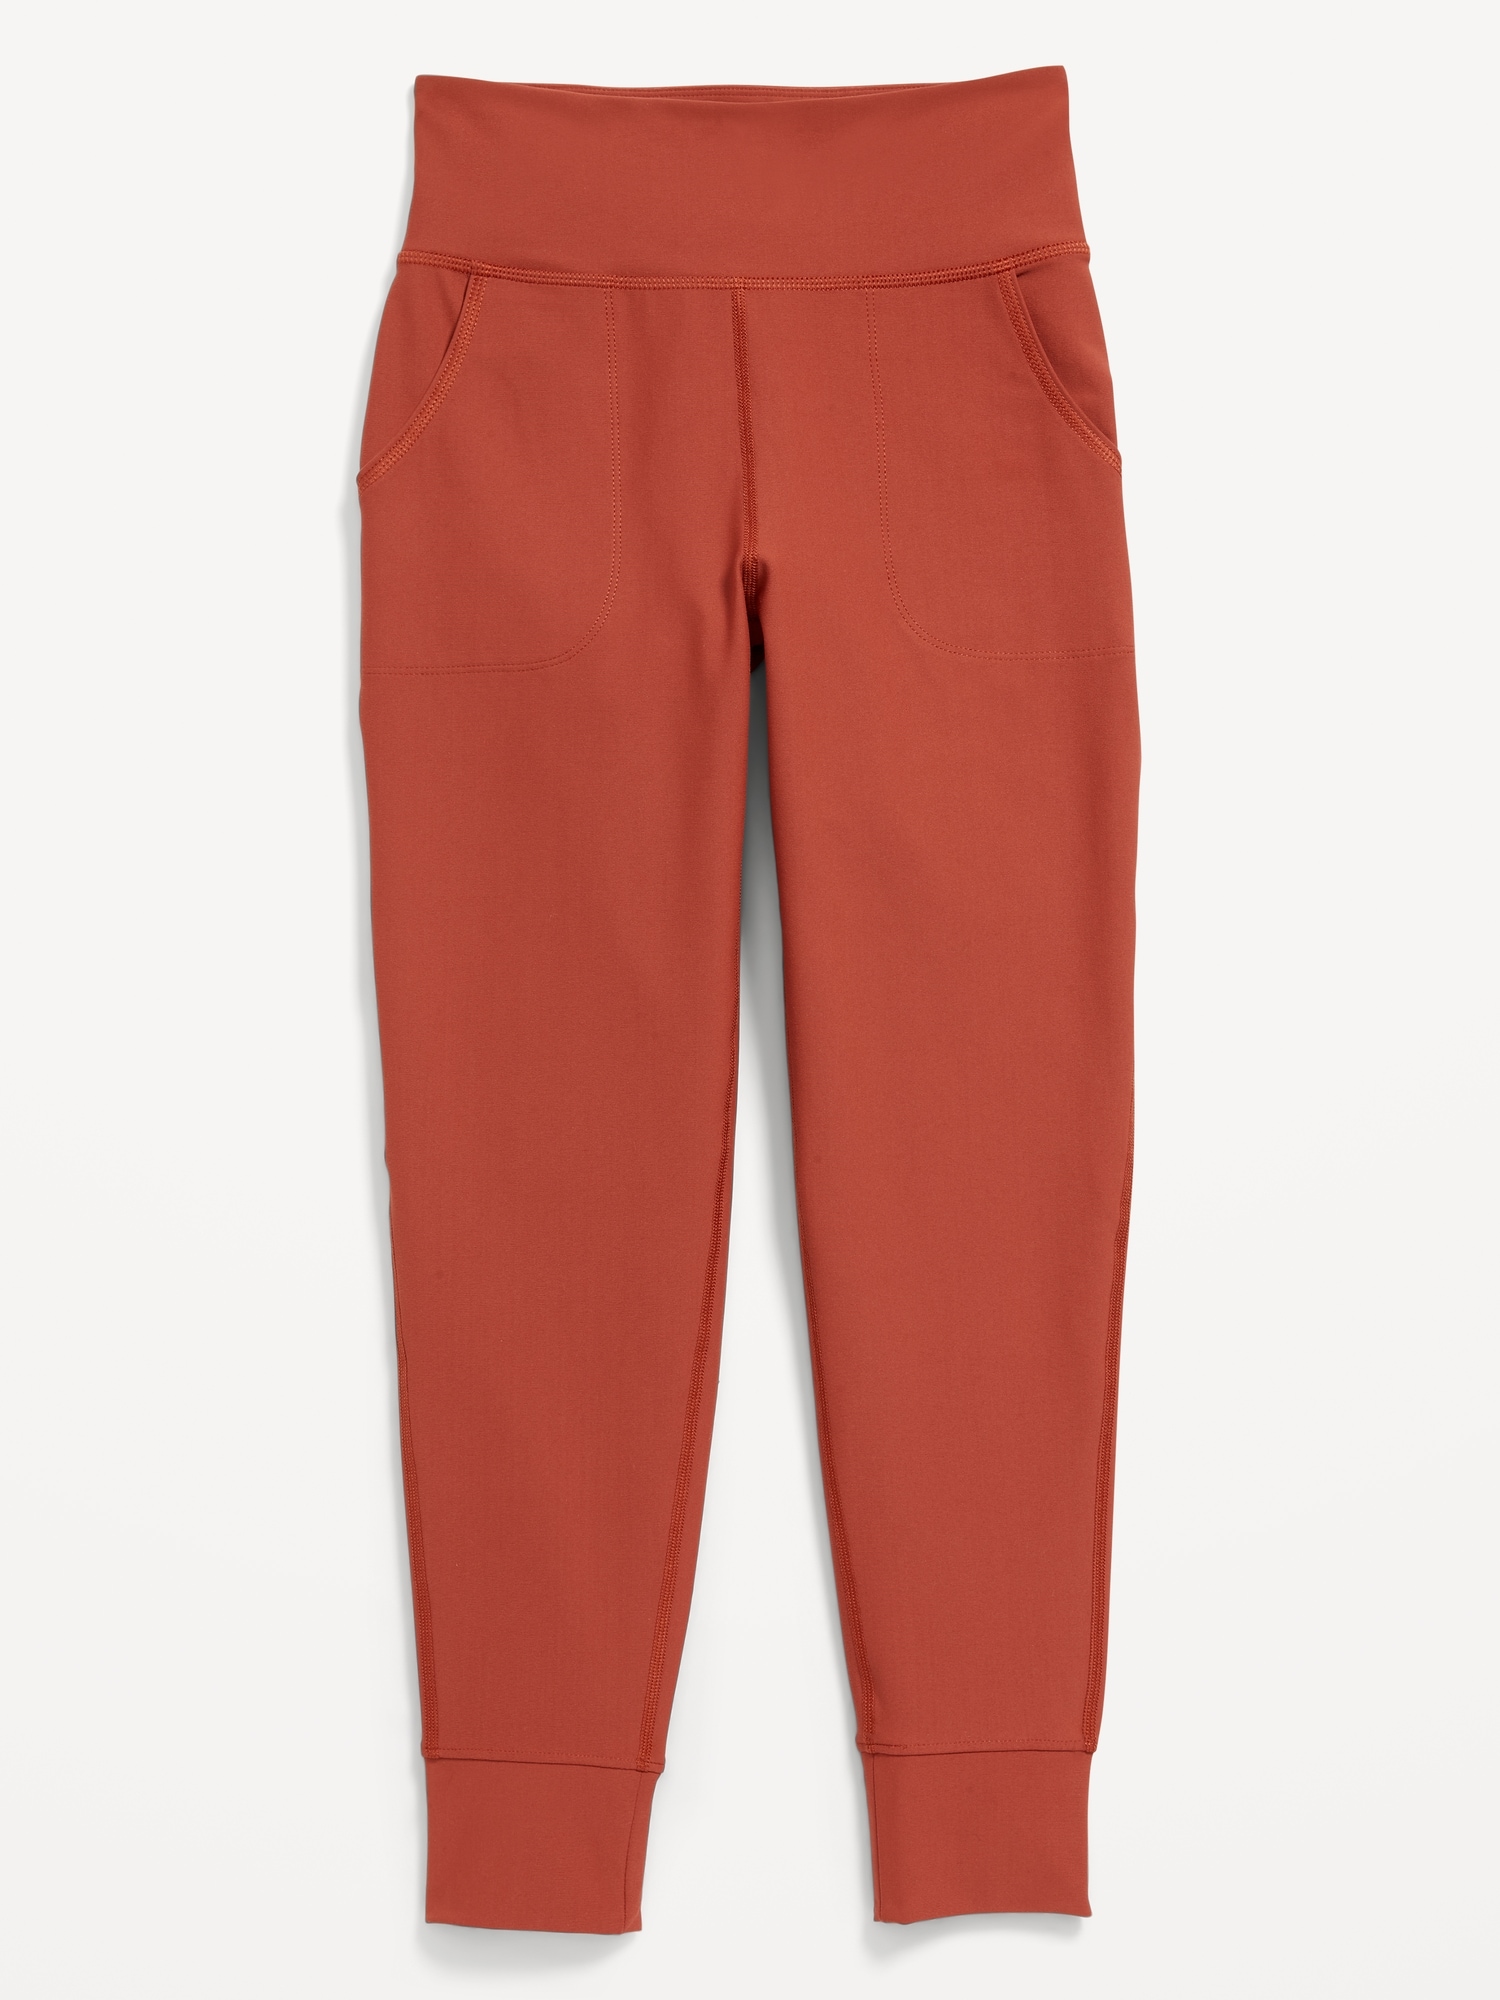 Today Only! Old Navy Women's Powersoft Joggers $18 or Men's Go Dry